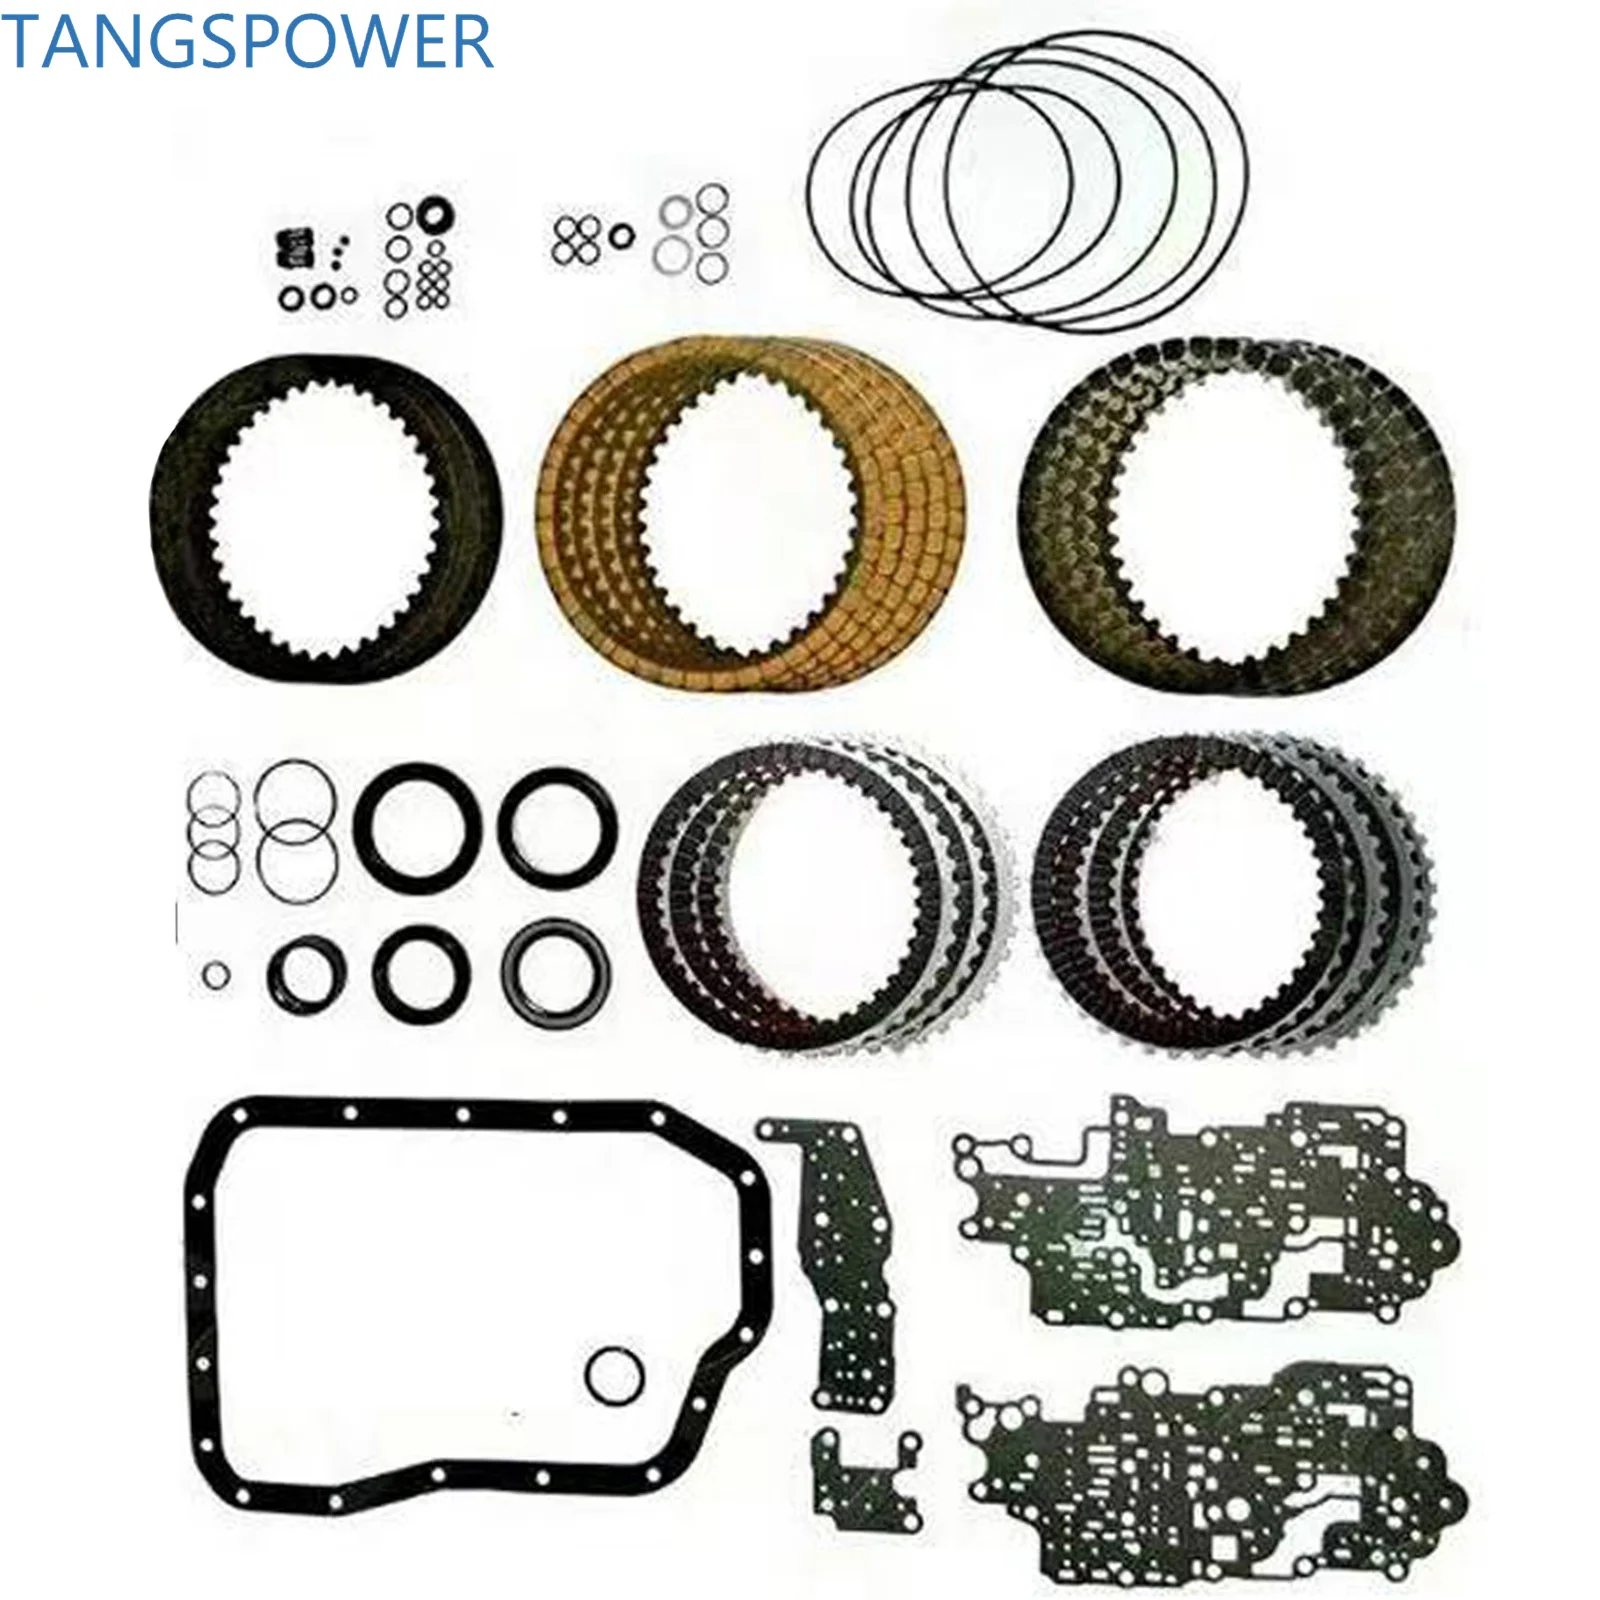 

U660E T19900A U660 6 Speed New Auto Transmission Rebuild Master Kit Oil Seals Rubber rings Friction Kit For TOYOTA For LEXUS